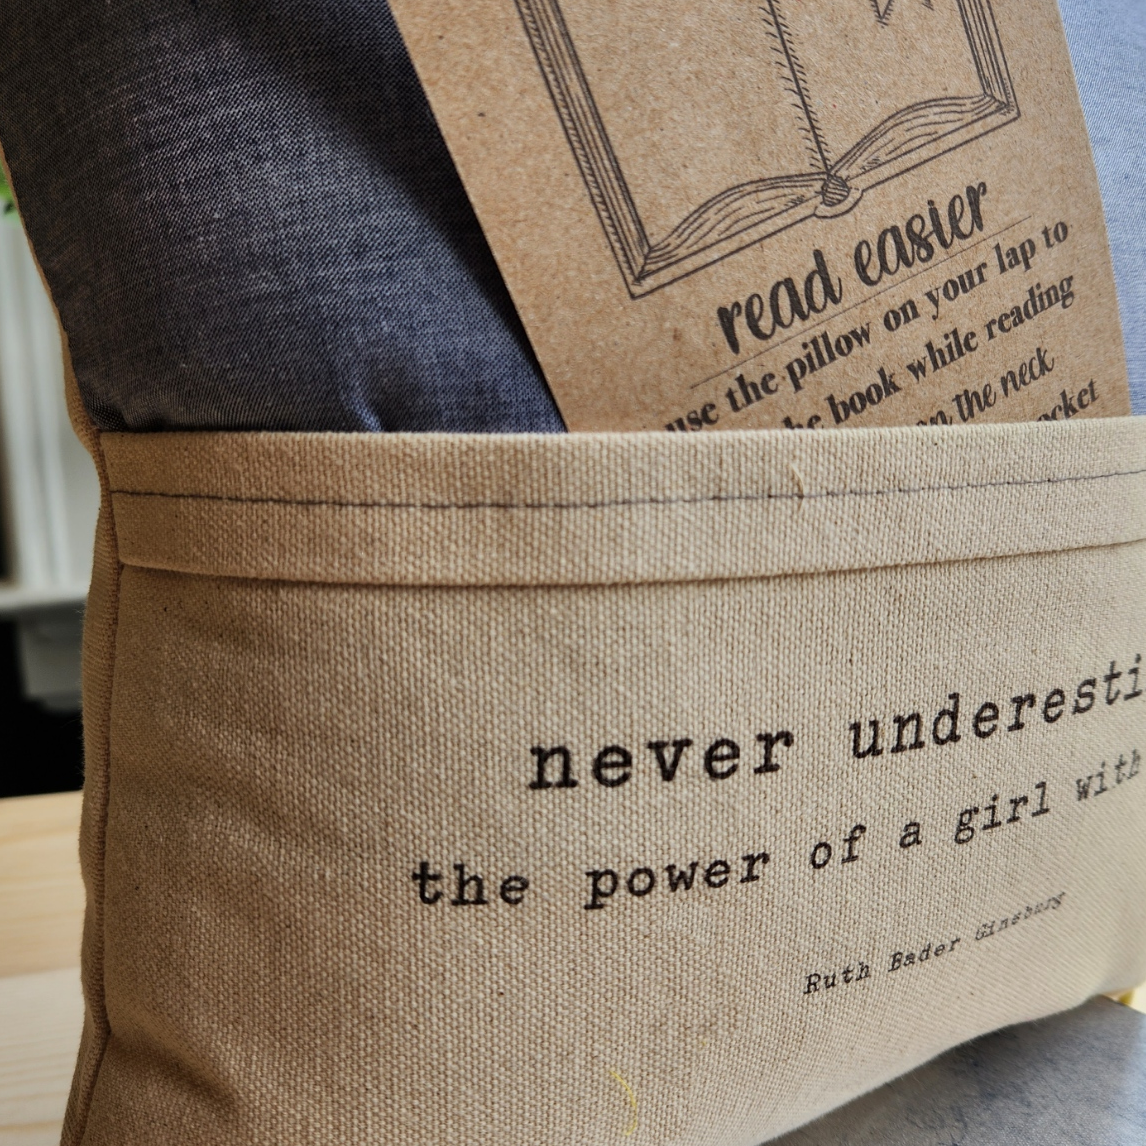 Reading Pillow- Never Underestimate, RBG, Chambray Core Desmond Brown